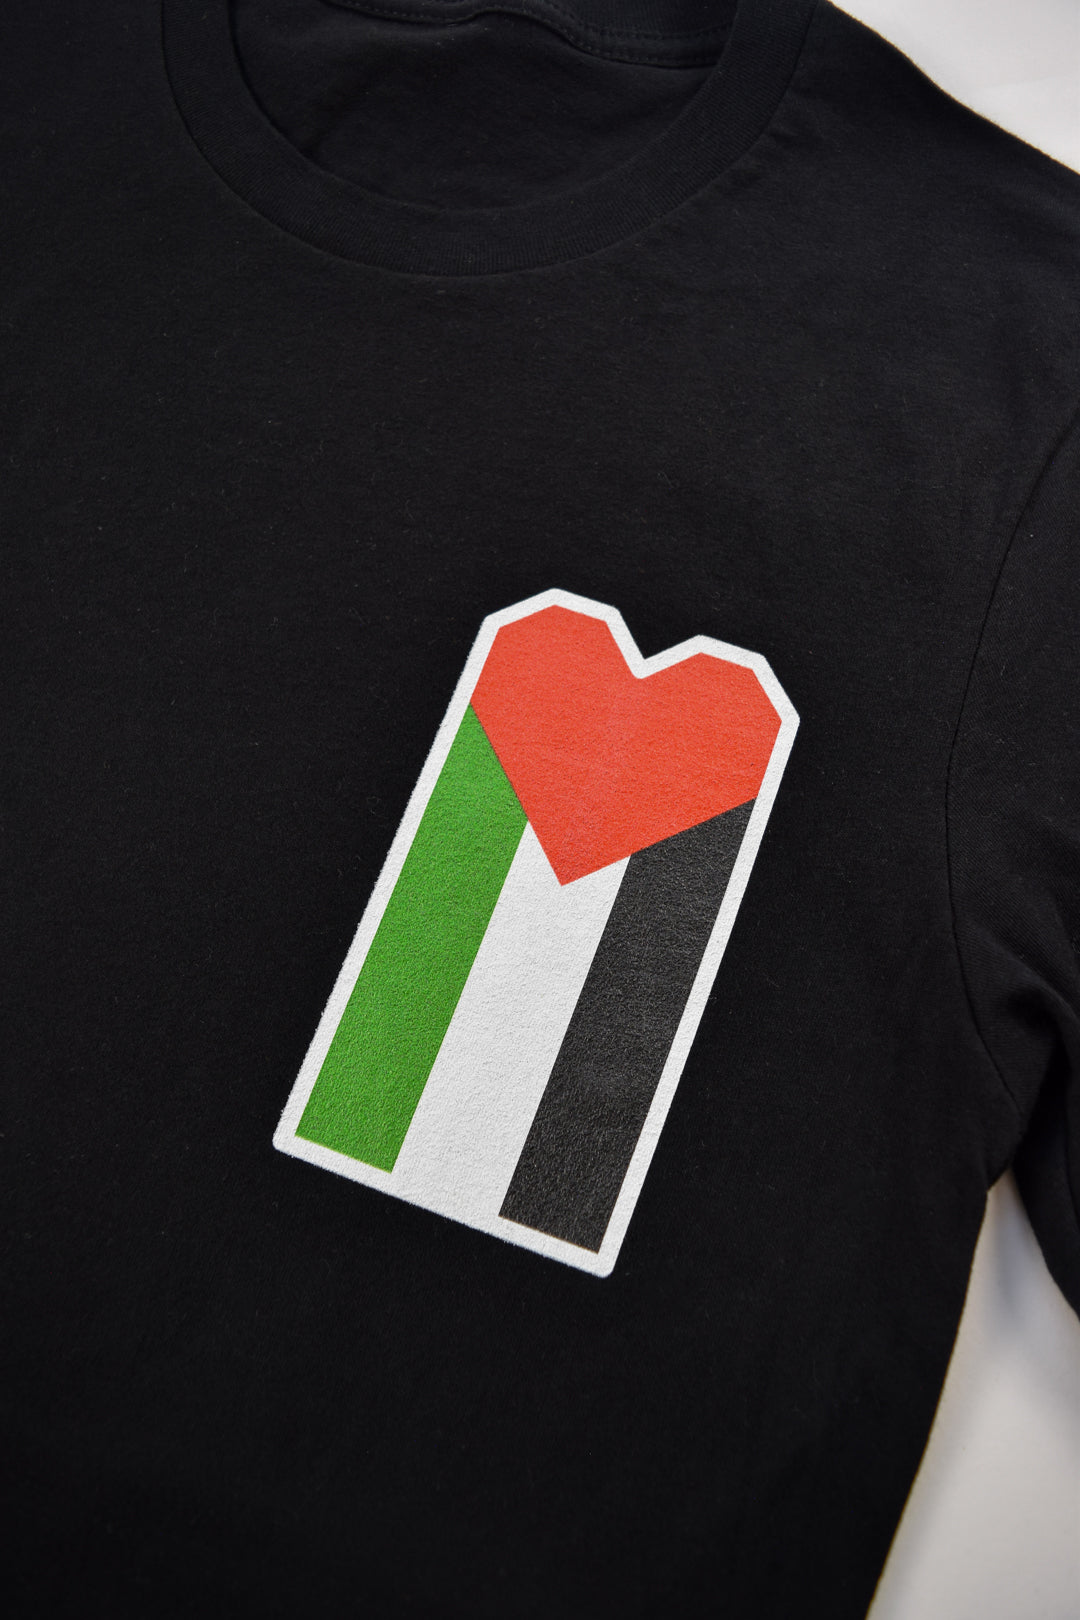 Palestinian flag where the red triangle takes the shape of a heart.